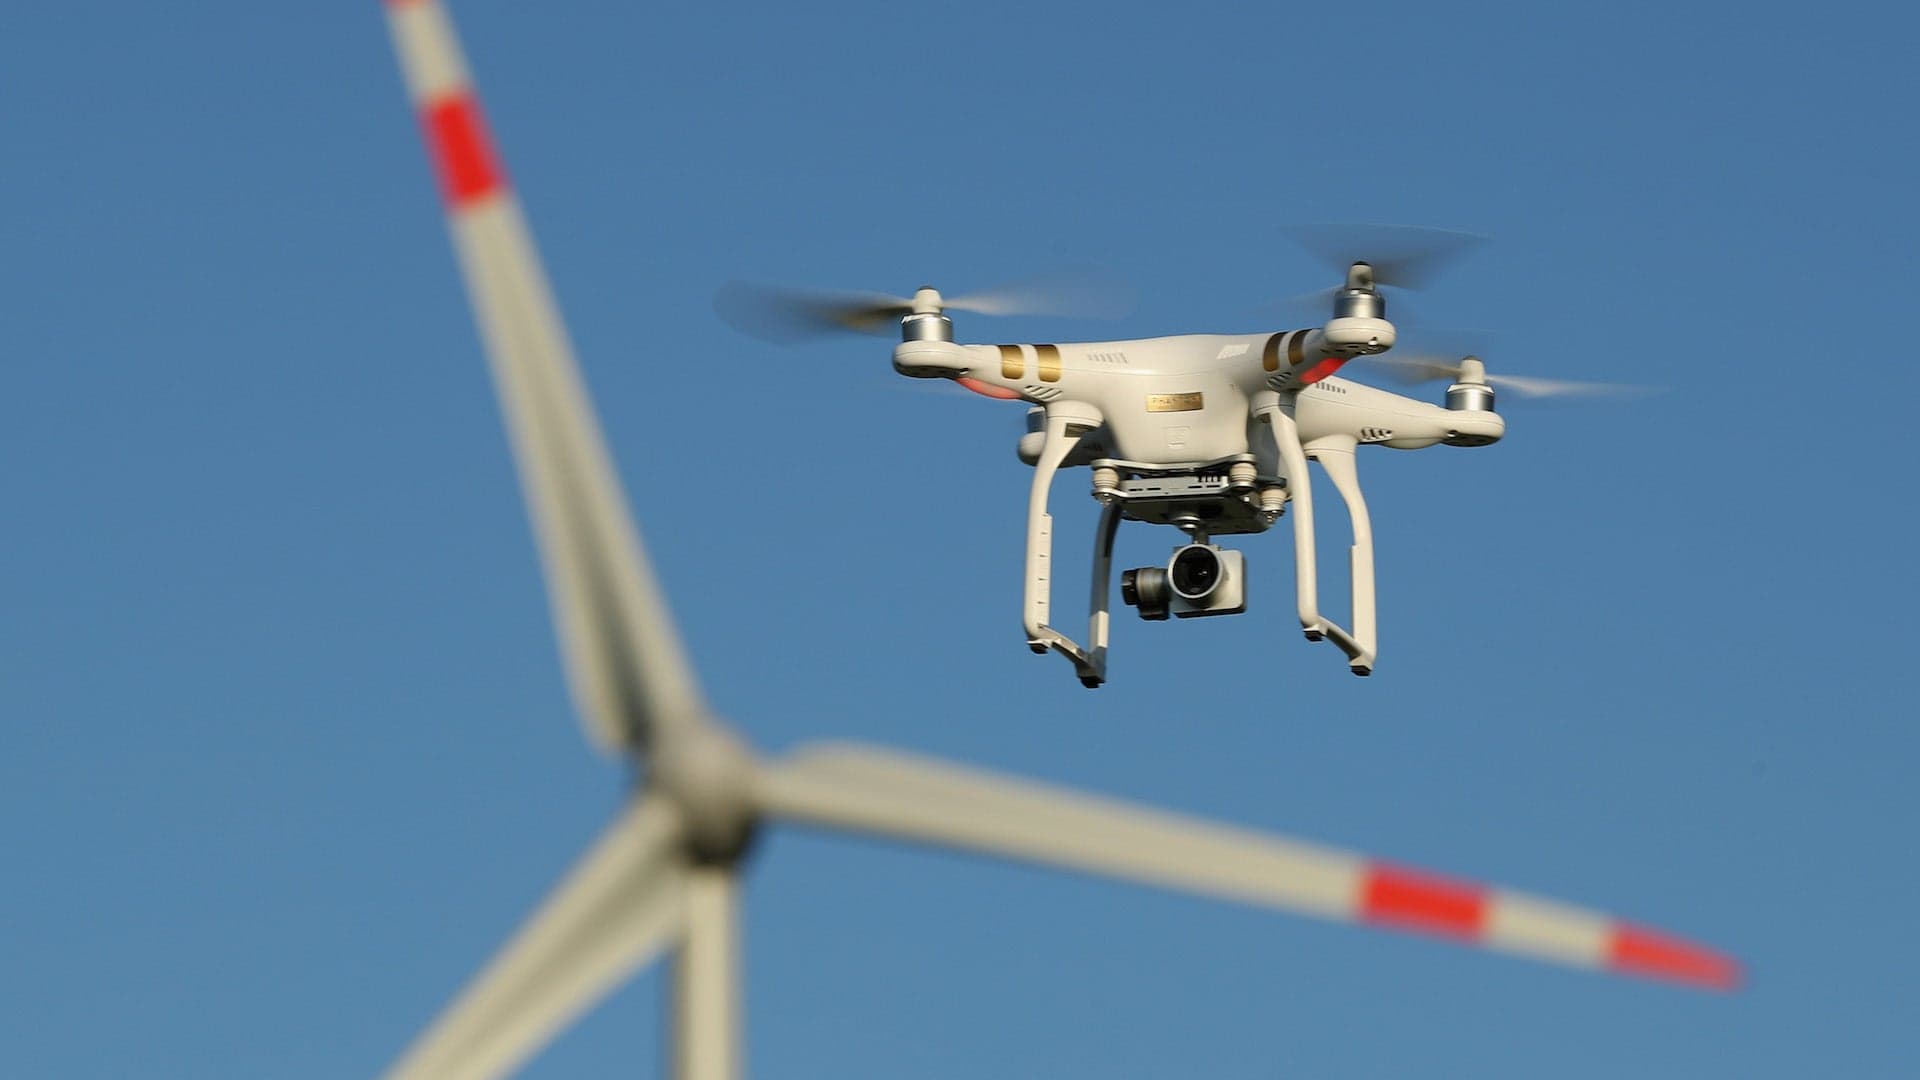 Measure Improves Productivity in Wind Farming By Using Drones